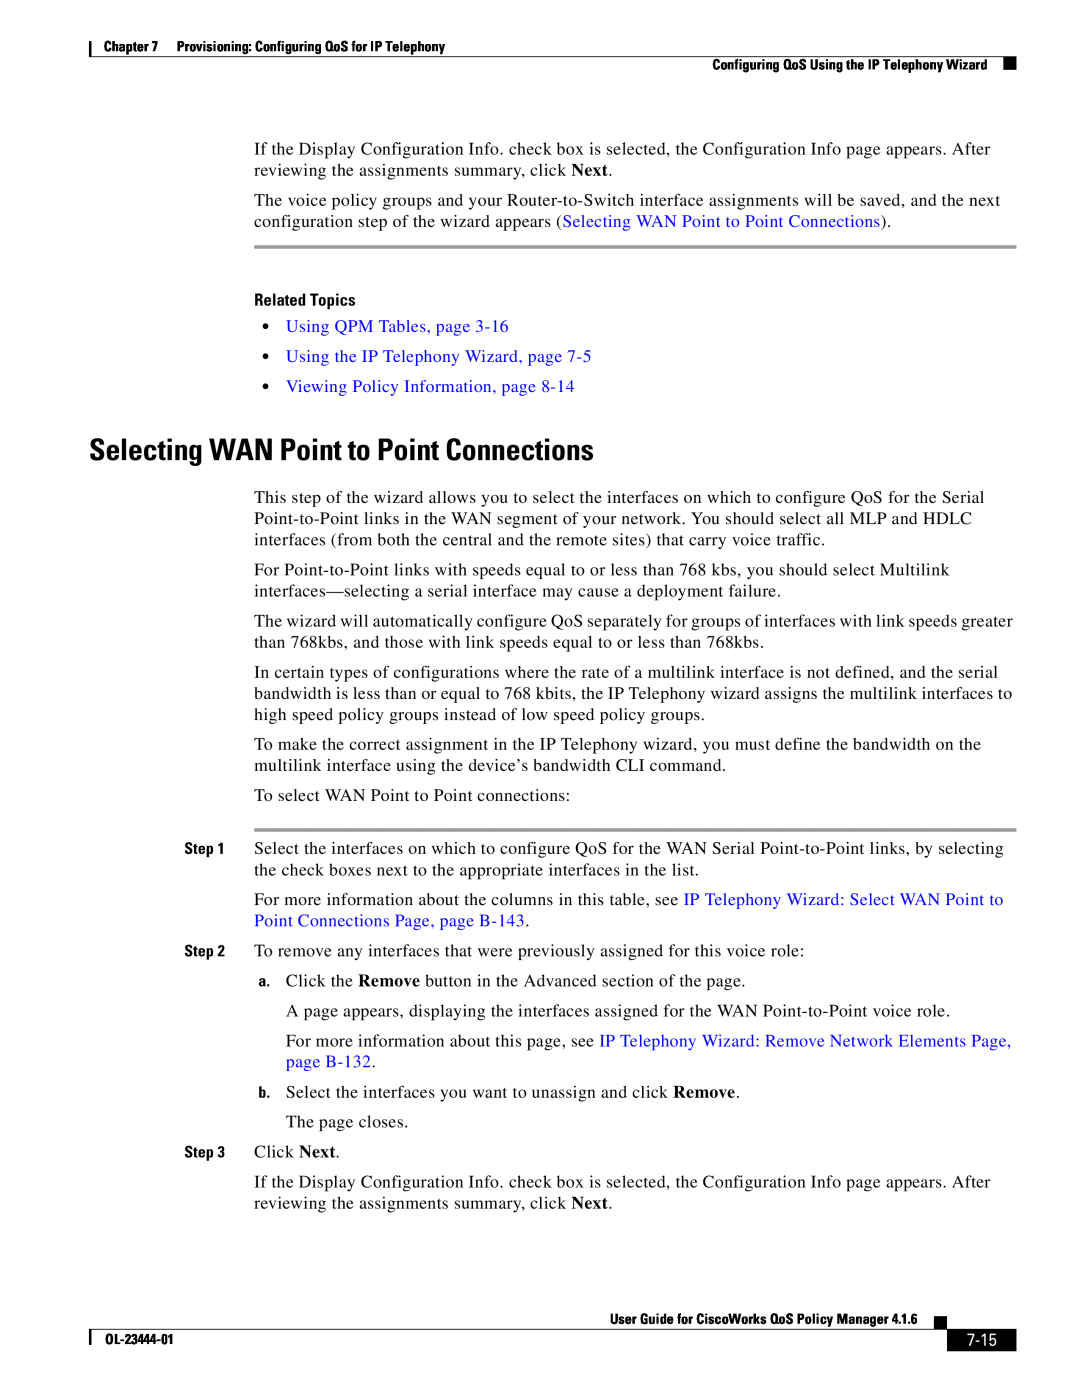 Cisco Systems 416 manual Selecting WAN Point to Point Connections, 7-15, Related Topics, Viewing Policy Information, page 